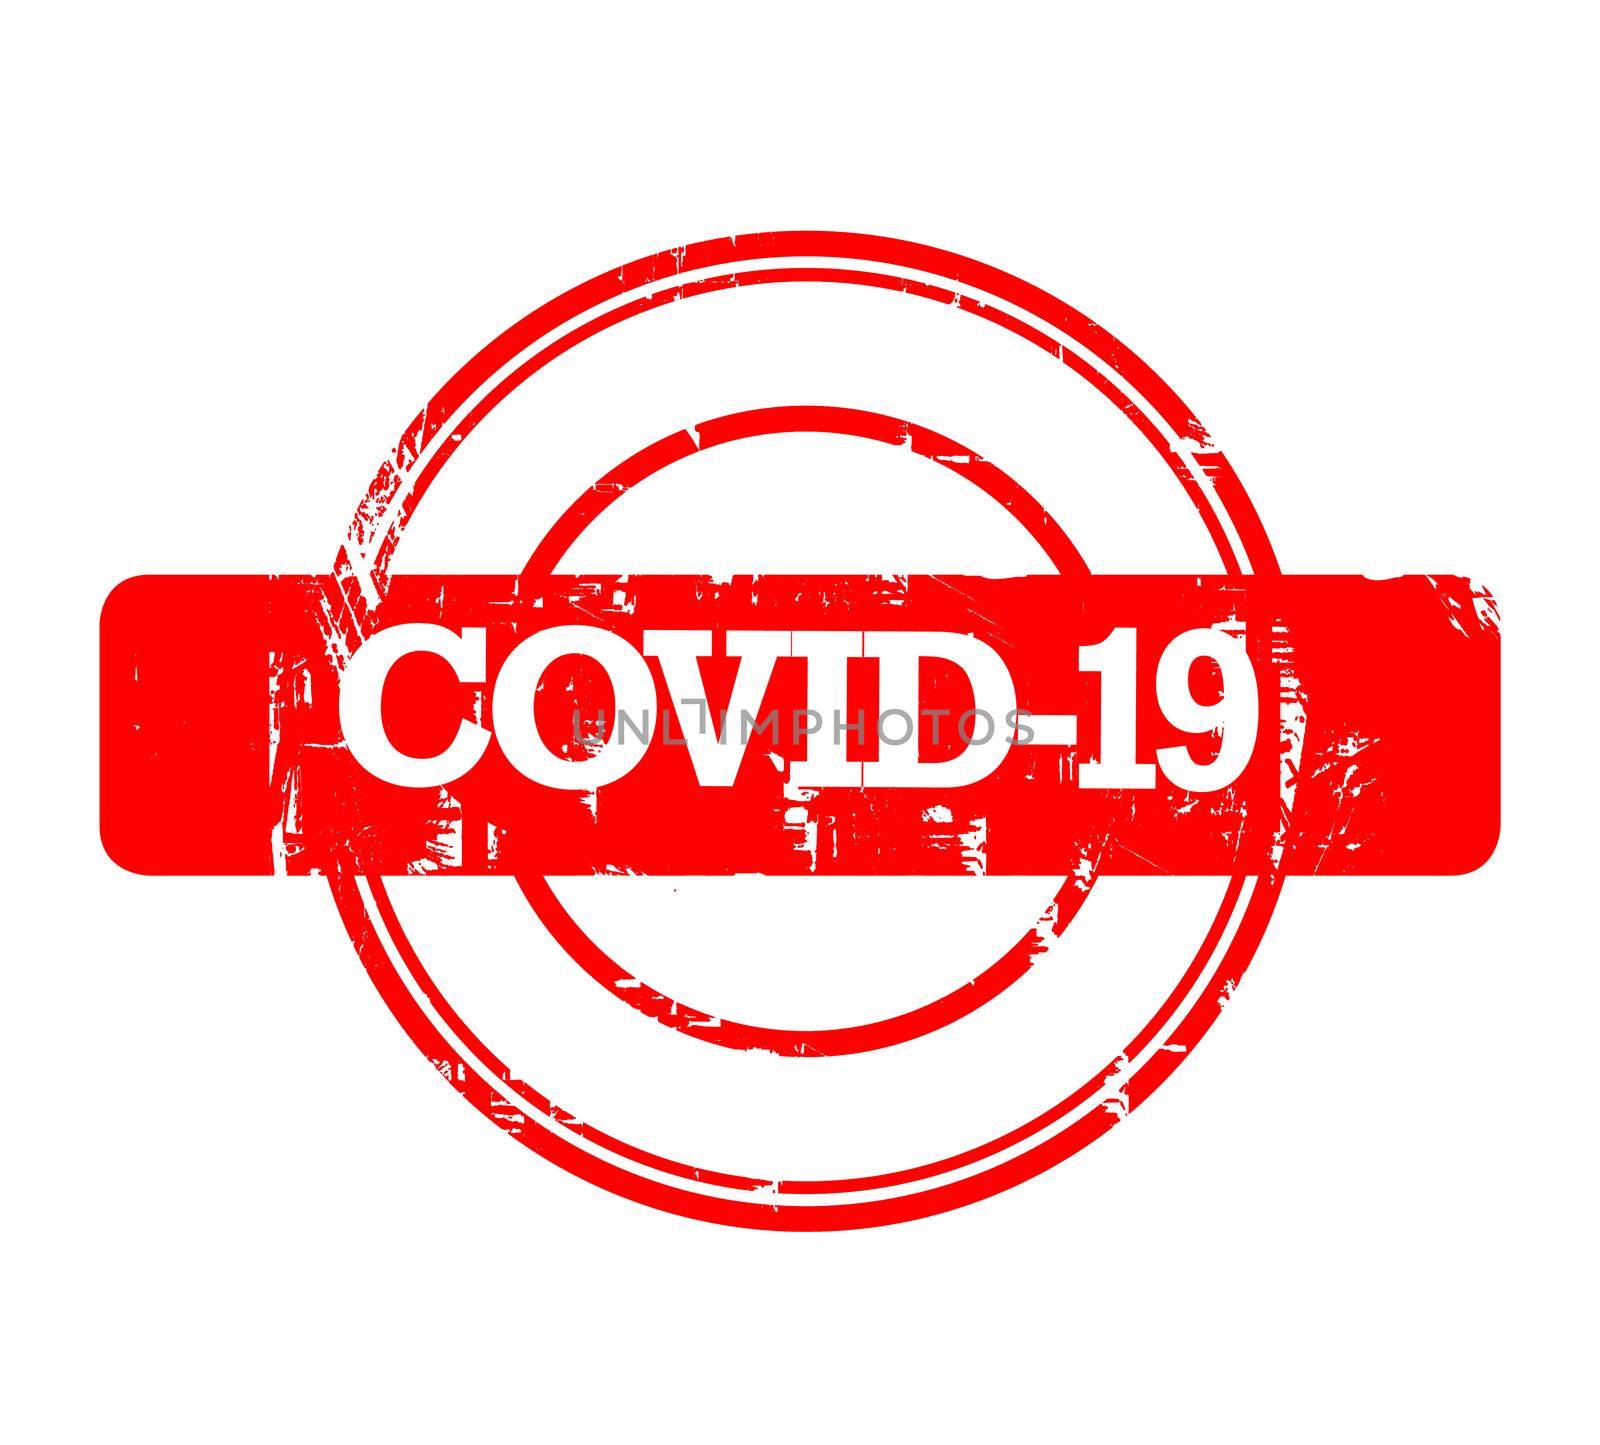 COVID-19 stamp in red isolated on a white background.